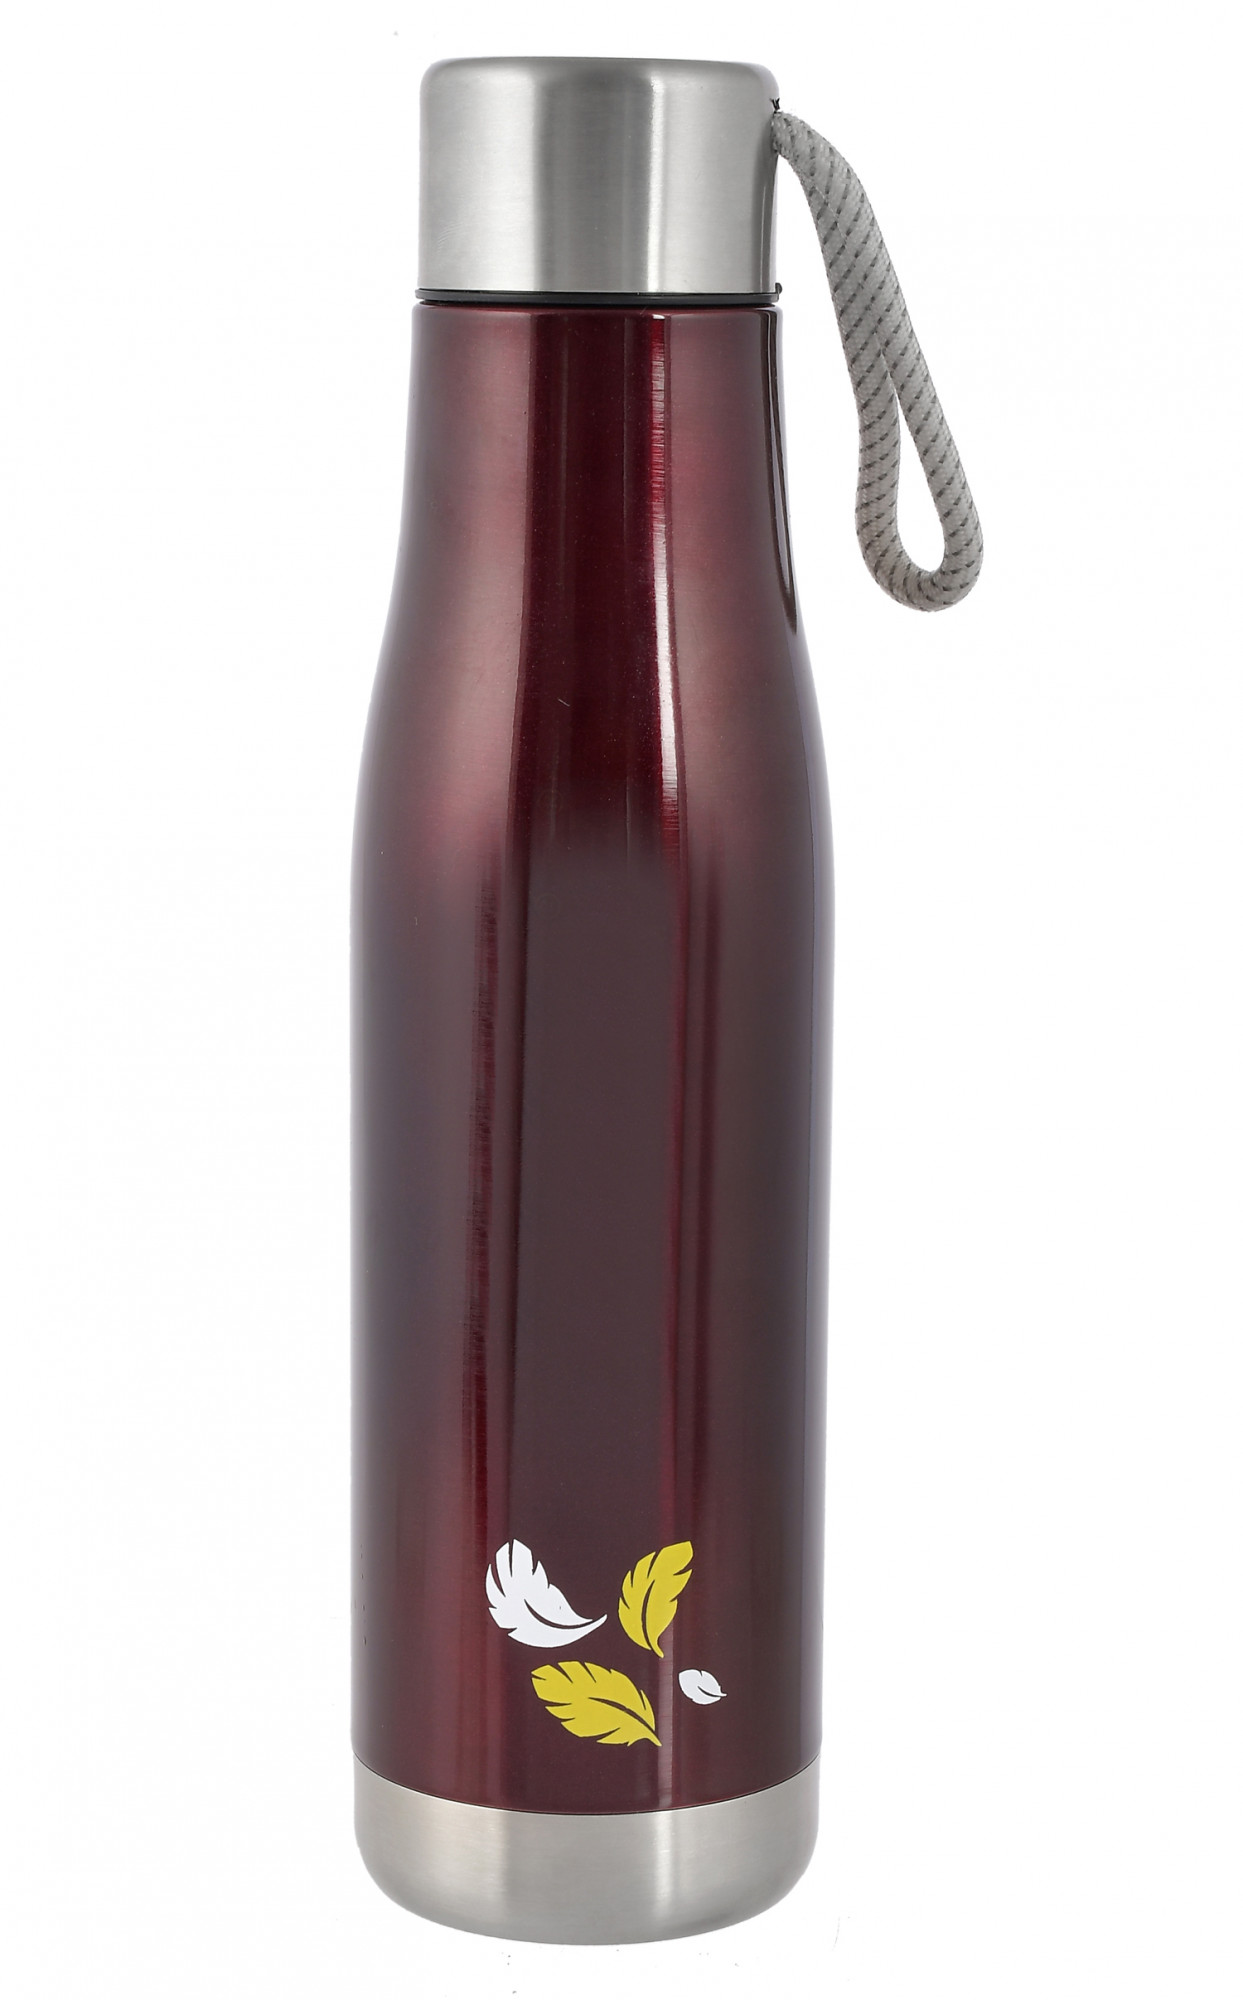 Kuber Industries Stainless Steel Hot And Cold Vacuum Flask With Carrying Strip, 500ml (Maroon)-HS42KUBMART25161